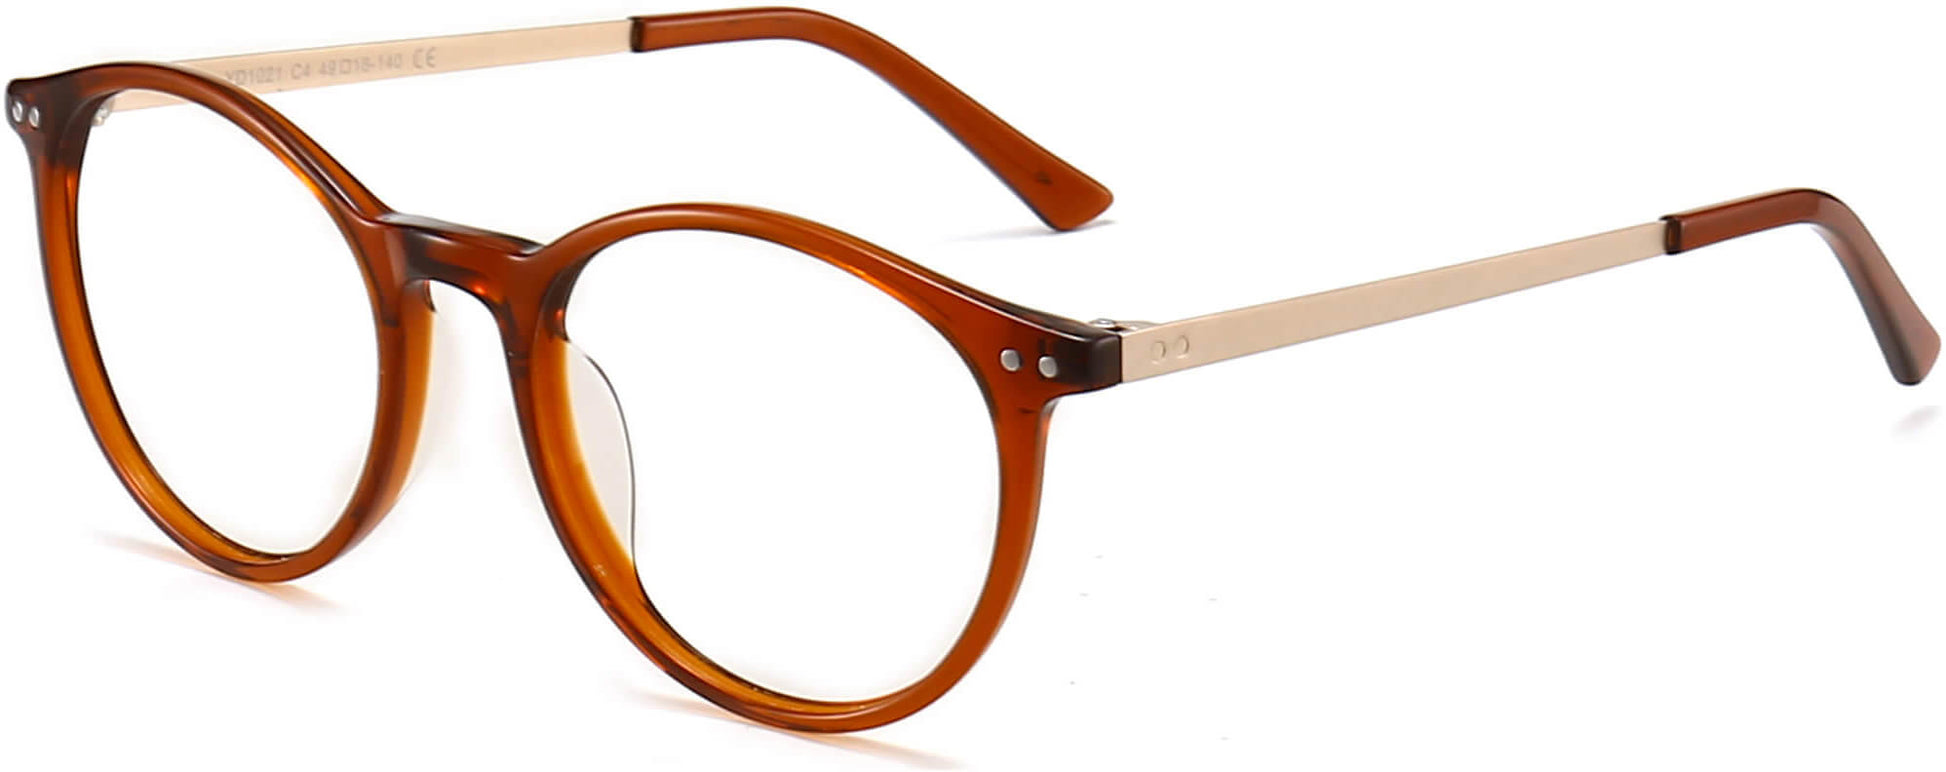 Dallas Round Brown Eyeglasses from ANRRI, angle view